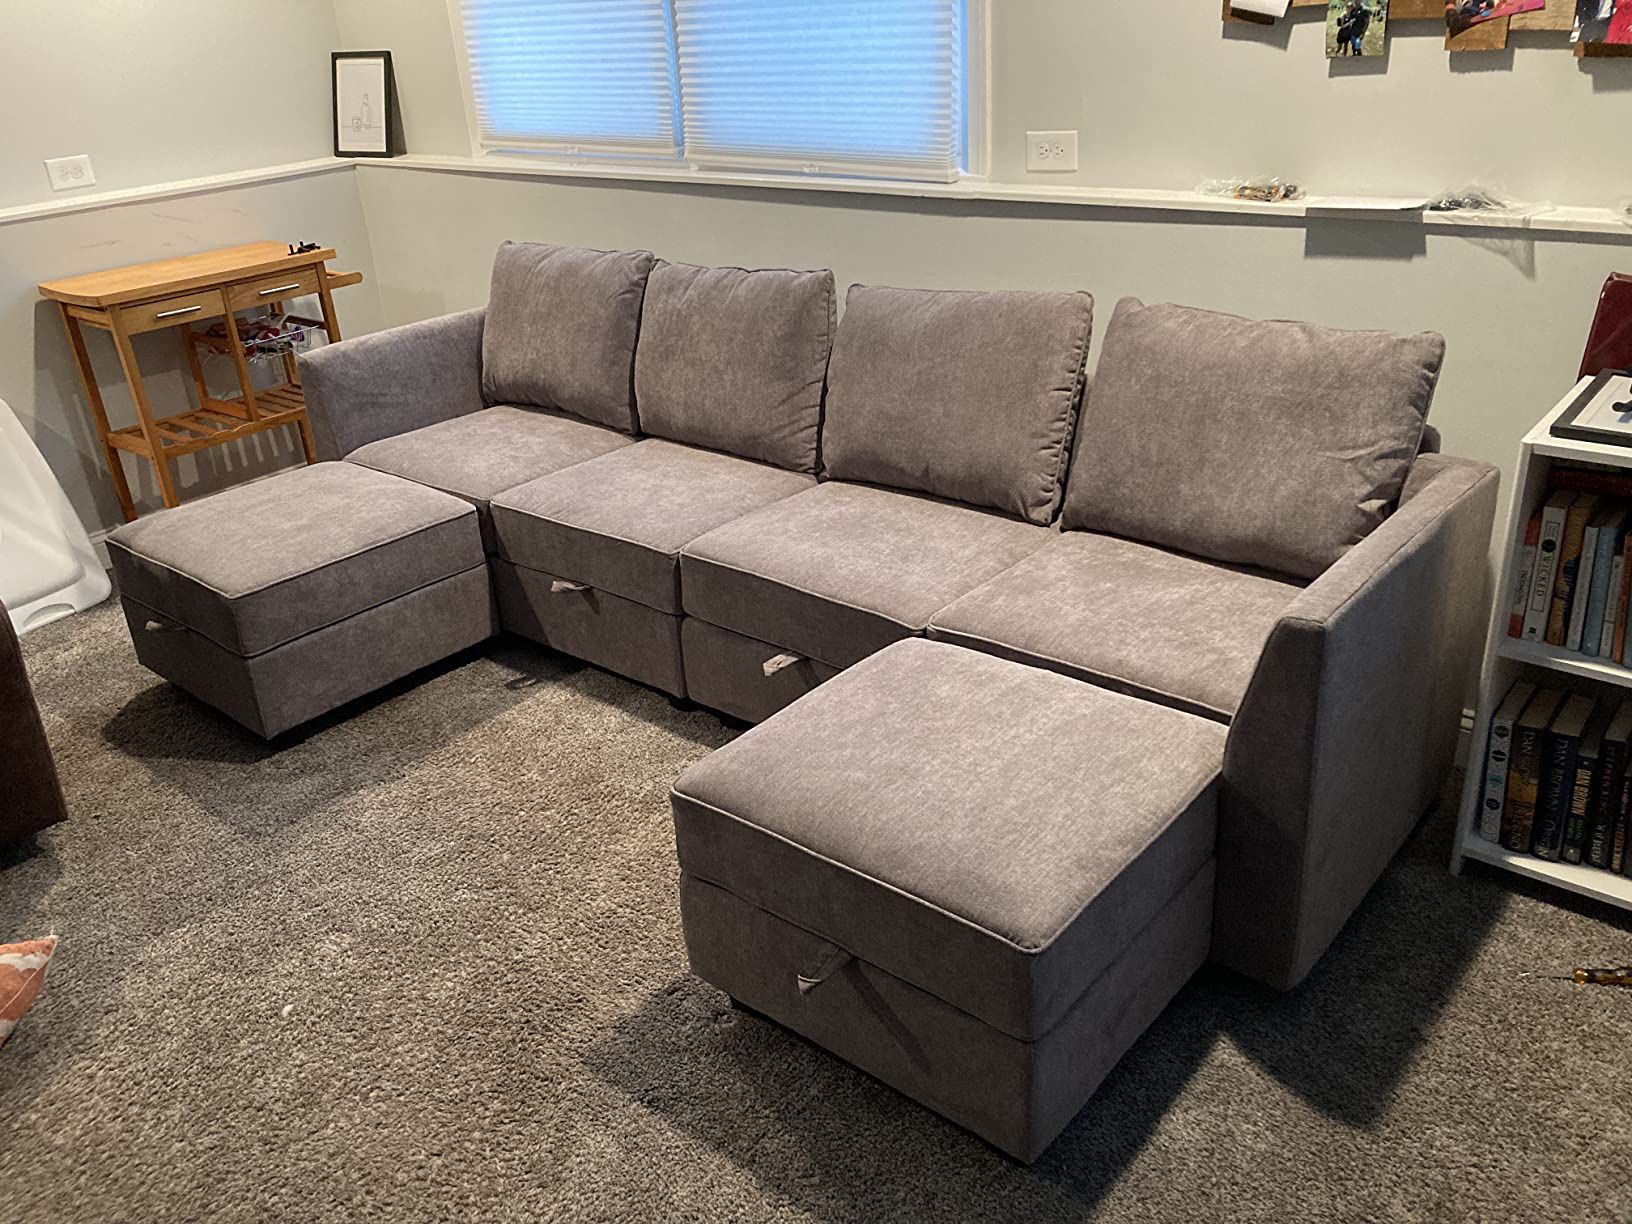 HONBAY Modular Sectional Sofa Sectional Modular Sofa with Storage Convertible Modular Sectional Couch for Living Room, Grey